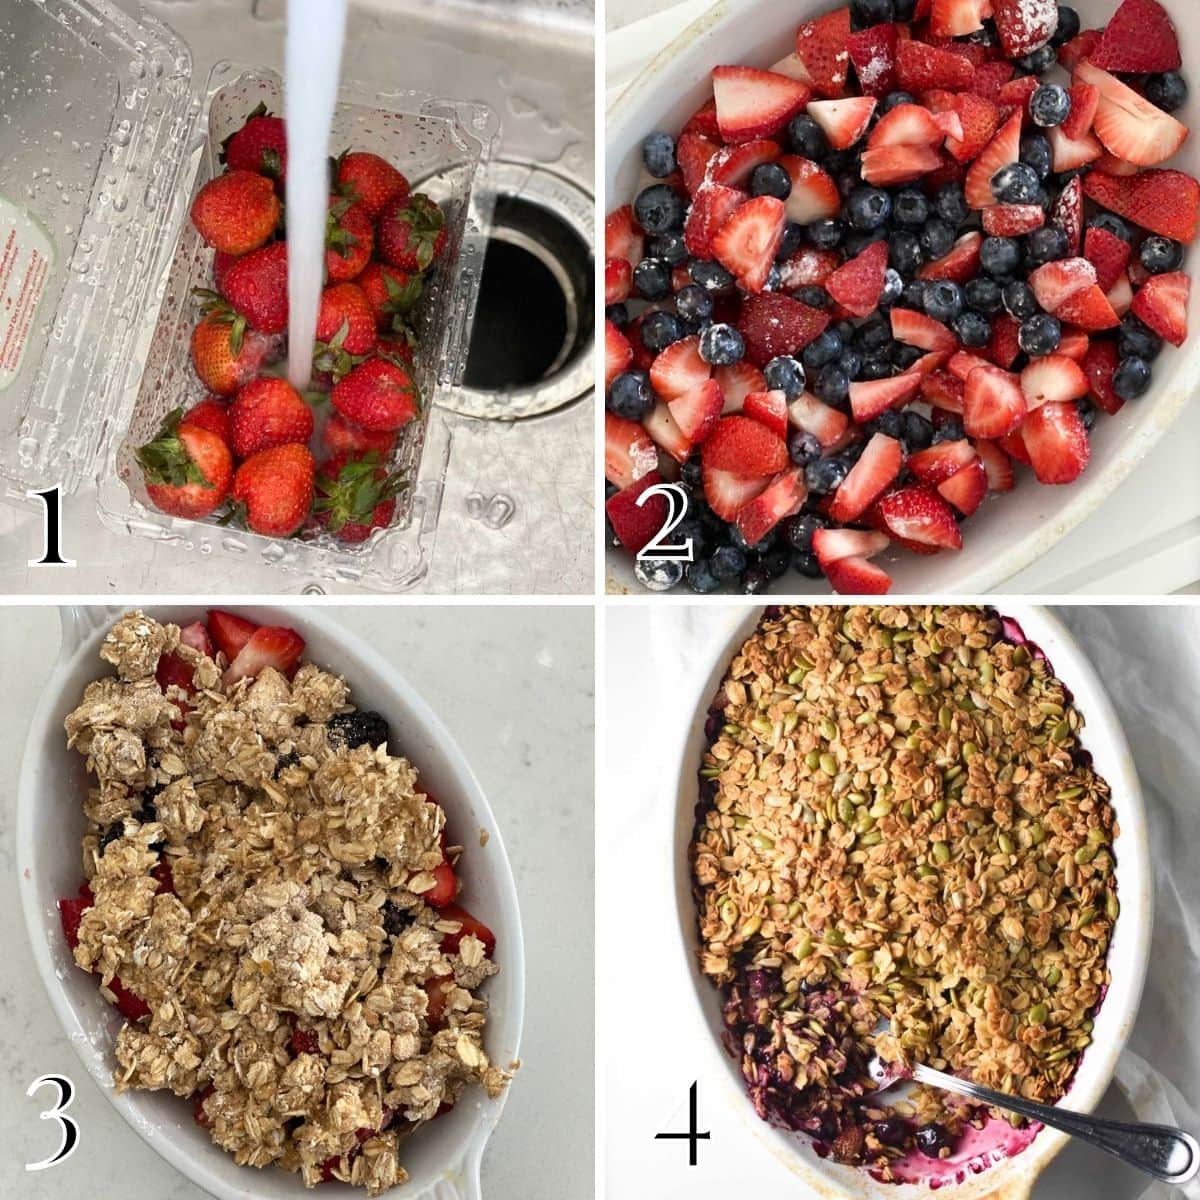 A step by step process for how to make a berry crisp from washing the strawberries, combining with blueberries, topping with oatmeal crumble and baking. 